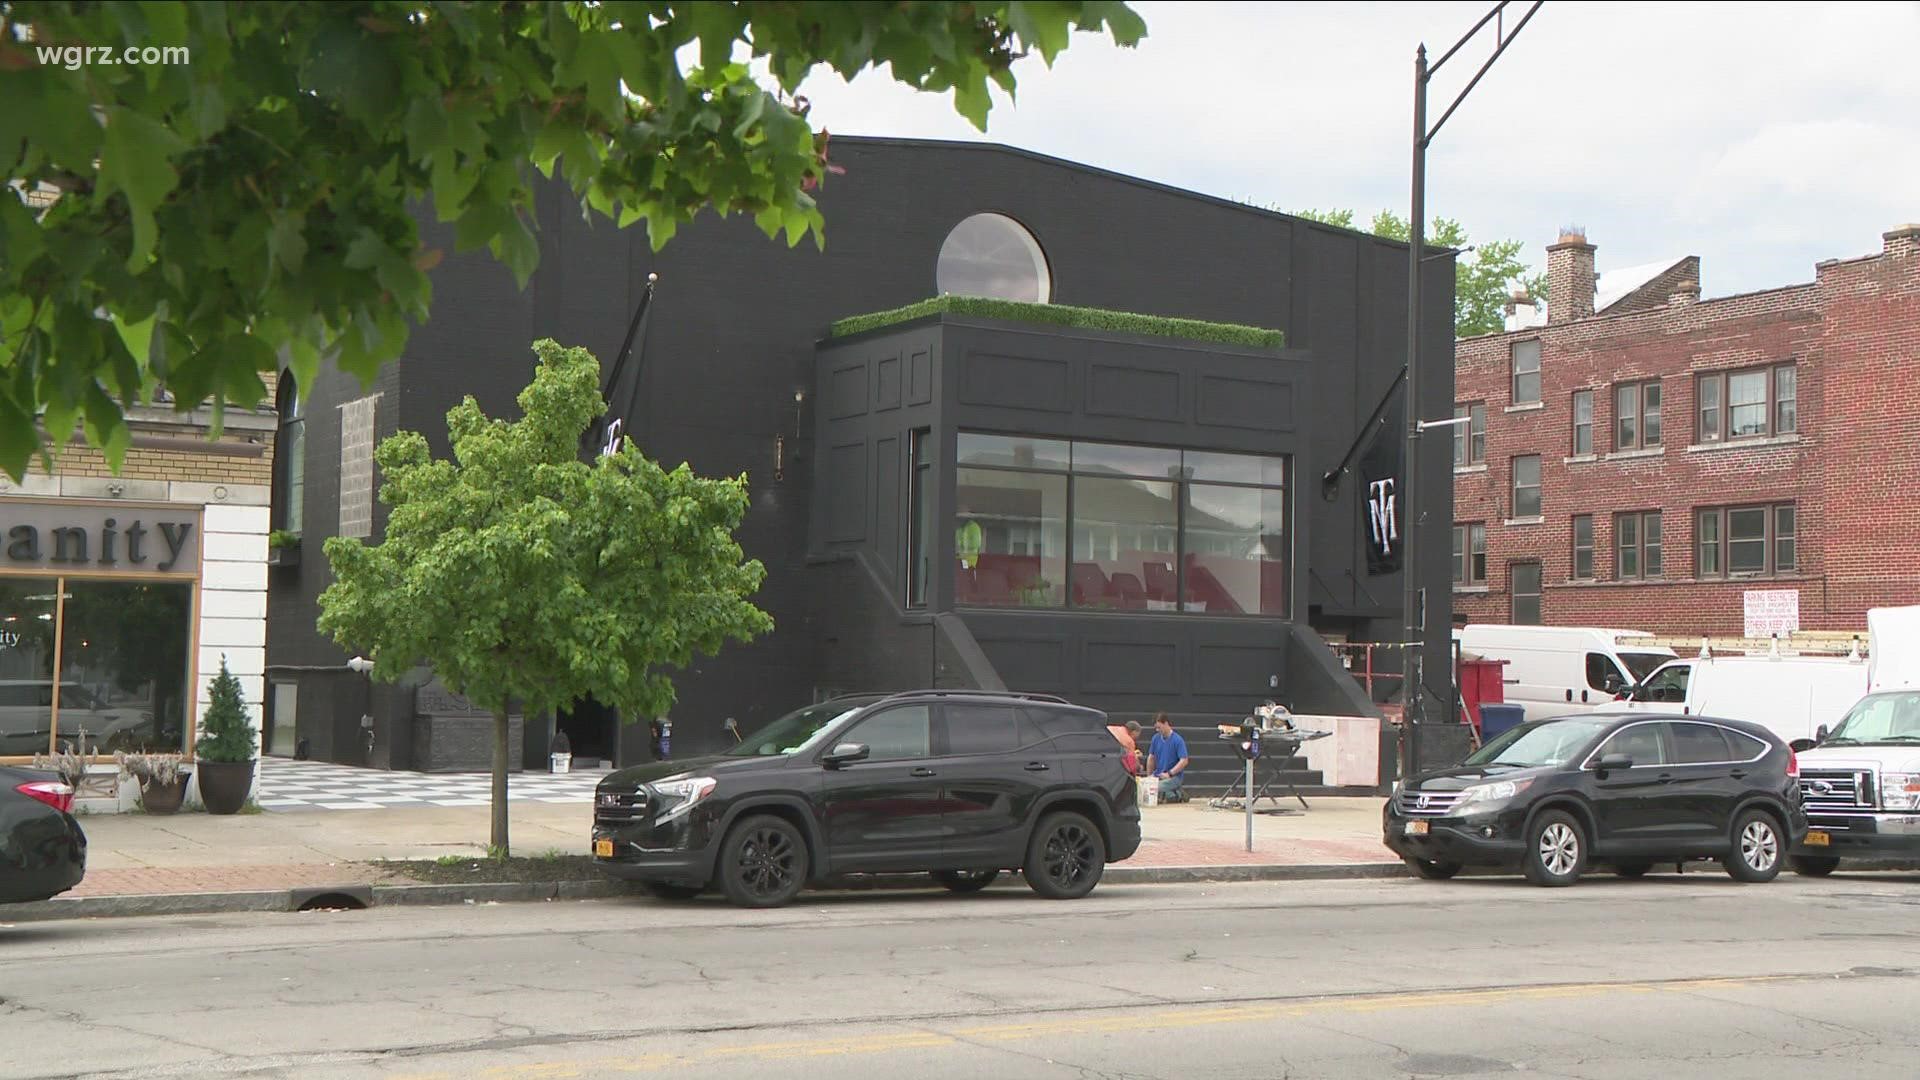 'The Monocle' on Hertel set to open this Friday